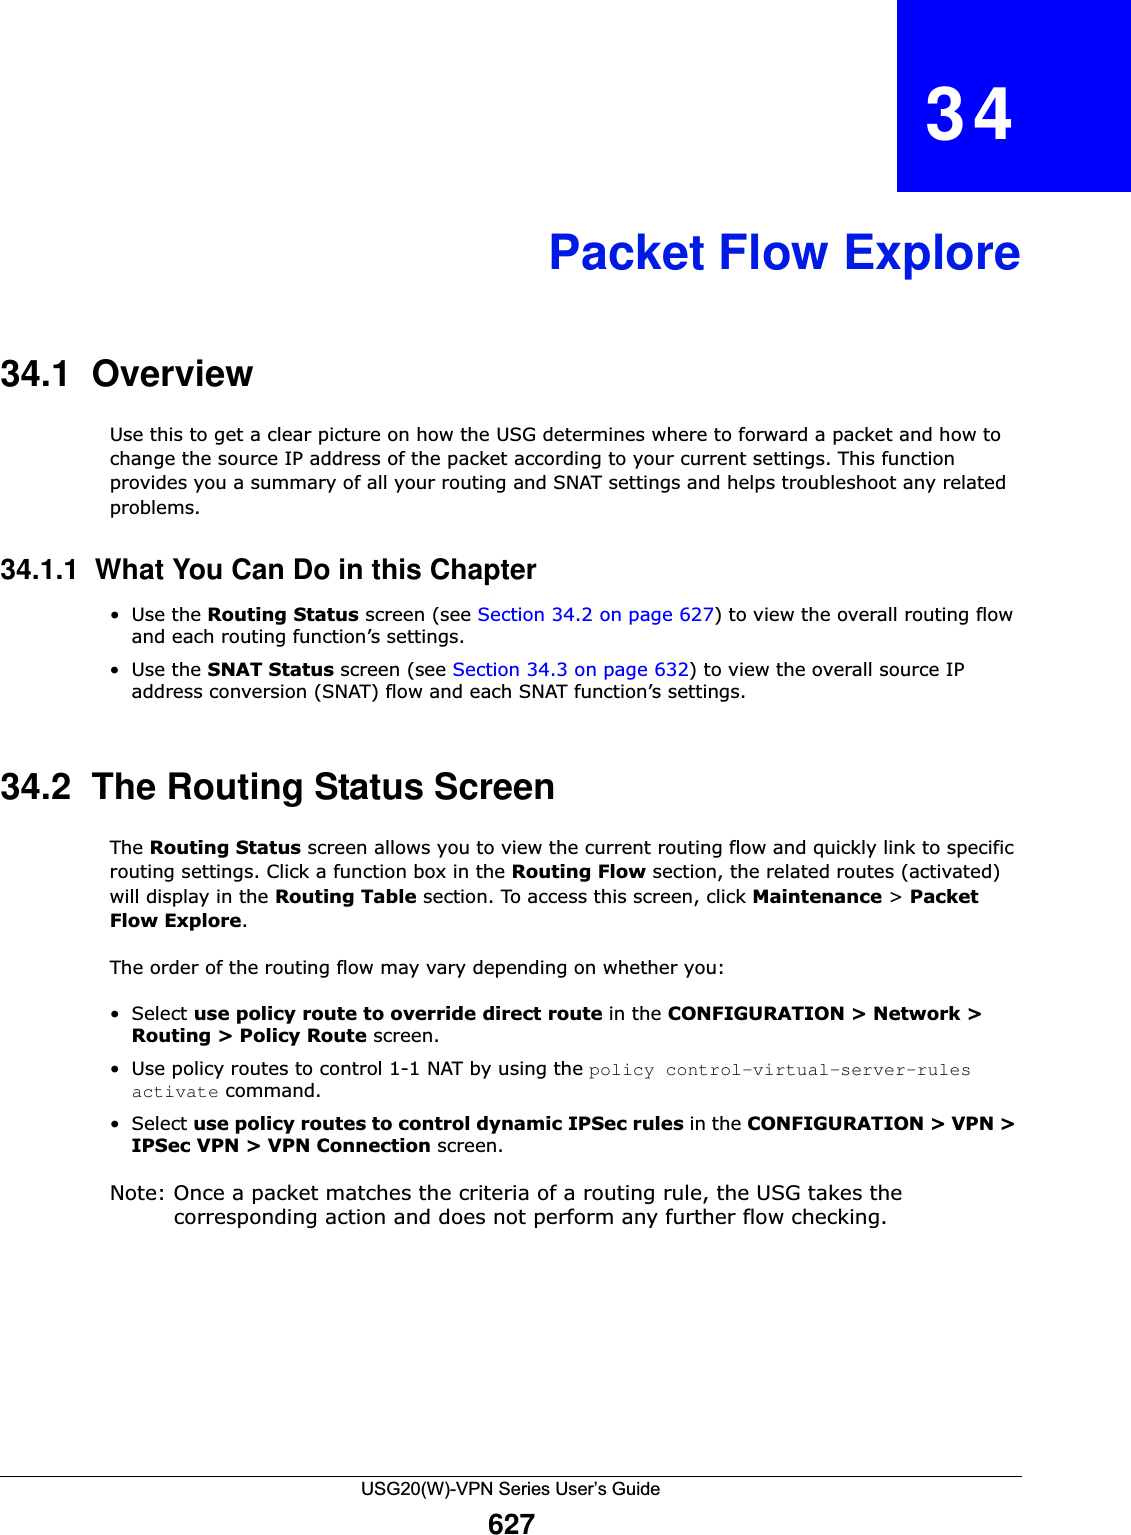 USG20(W)-VPN Series User’s Guide627CHAPTER   34Packet Flow Explore34.1  OverviewUse this to get a clear picture on how the USG determines where to forward a packet and how to change the source IP address of the packet according to your current settings. This function provides you a summary of all your routing and SNAT settings and helps troubleshoot any related problems.34.1.1  What You Can Do in this Chapter•Use the Routing Status screen (see Section 34.2 on page 627) to view the overall routing flow and each routing function’s settings.•Use the SNAT Status screen (see Section 34.3 on page 632) to view the overall source IP address conversion (SNAT) flow and each SNAT function’s settings.34.2  The Routing Status ScreenThe Routing Status screen allows you to view the current routing flow and quickly link to specific routing settings. Click a function box in the Routing Flow section, the related routes (activated) will display in the Routing Table section. To access this screen, click Maintenance &gt; PacketFlow Explore.The order of the routing flow may vary depending on whether you:•Select use policy route to override direct route in the CONFIGURATION &gt; Network &gt; Routing &gt; Policy Route screen.• Use policy routes to control 1-1 NAT by using the policy control-virtual-server-rules activate command.•Select use policy routes to control dynamic IPSec rules in the CONFIGURATION &gt; VPN &gt; IPSec VPN &gt; VPN Connection screen.Note: Once a packet matches the criteria of a routing rule, the USG takes the corresponding action and does not perform any further flow checking. 